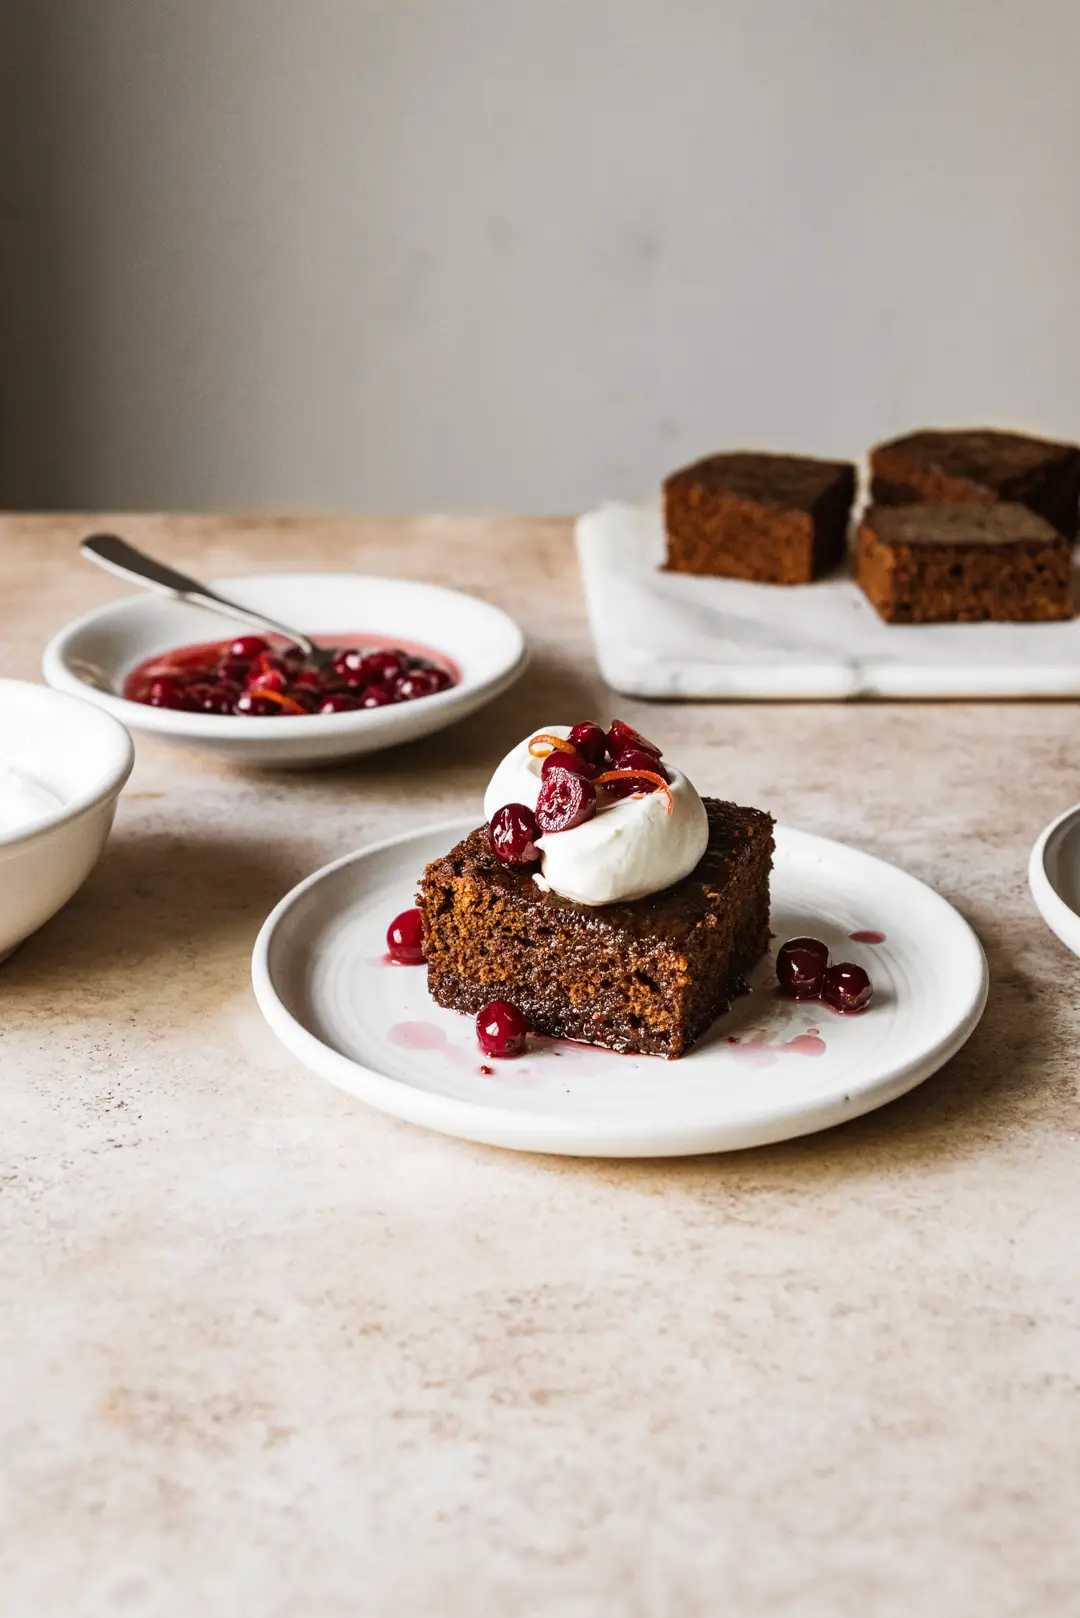 This sticky gingerbread spice cake features warm flavors with a sticky exterior that yields to a tender crumb